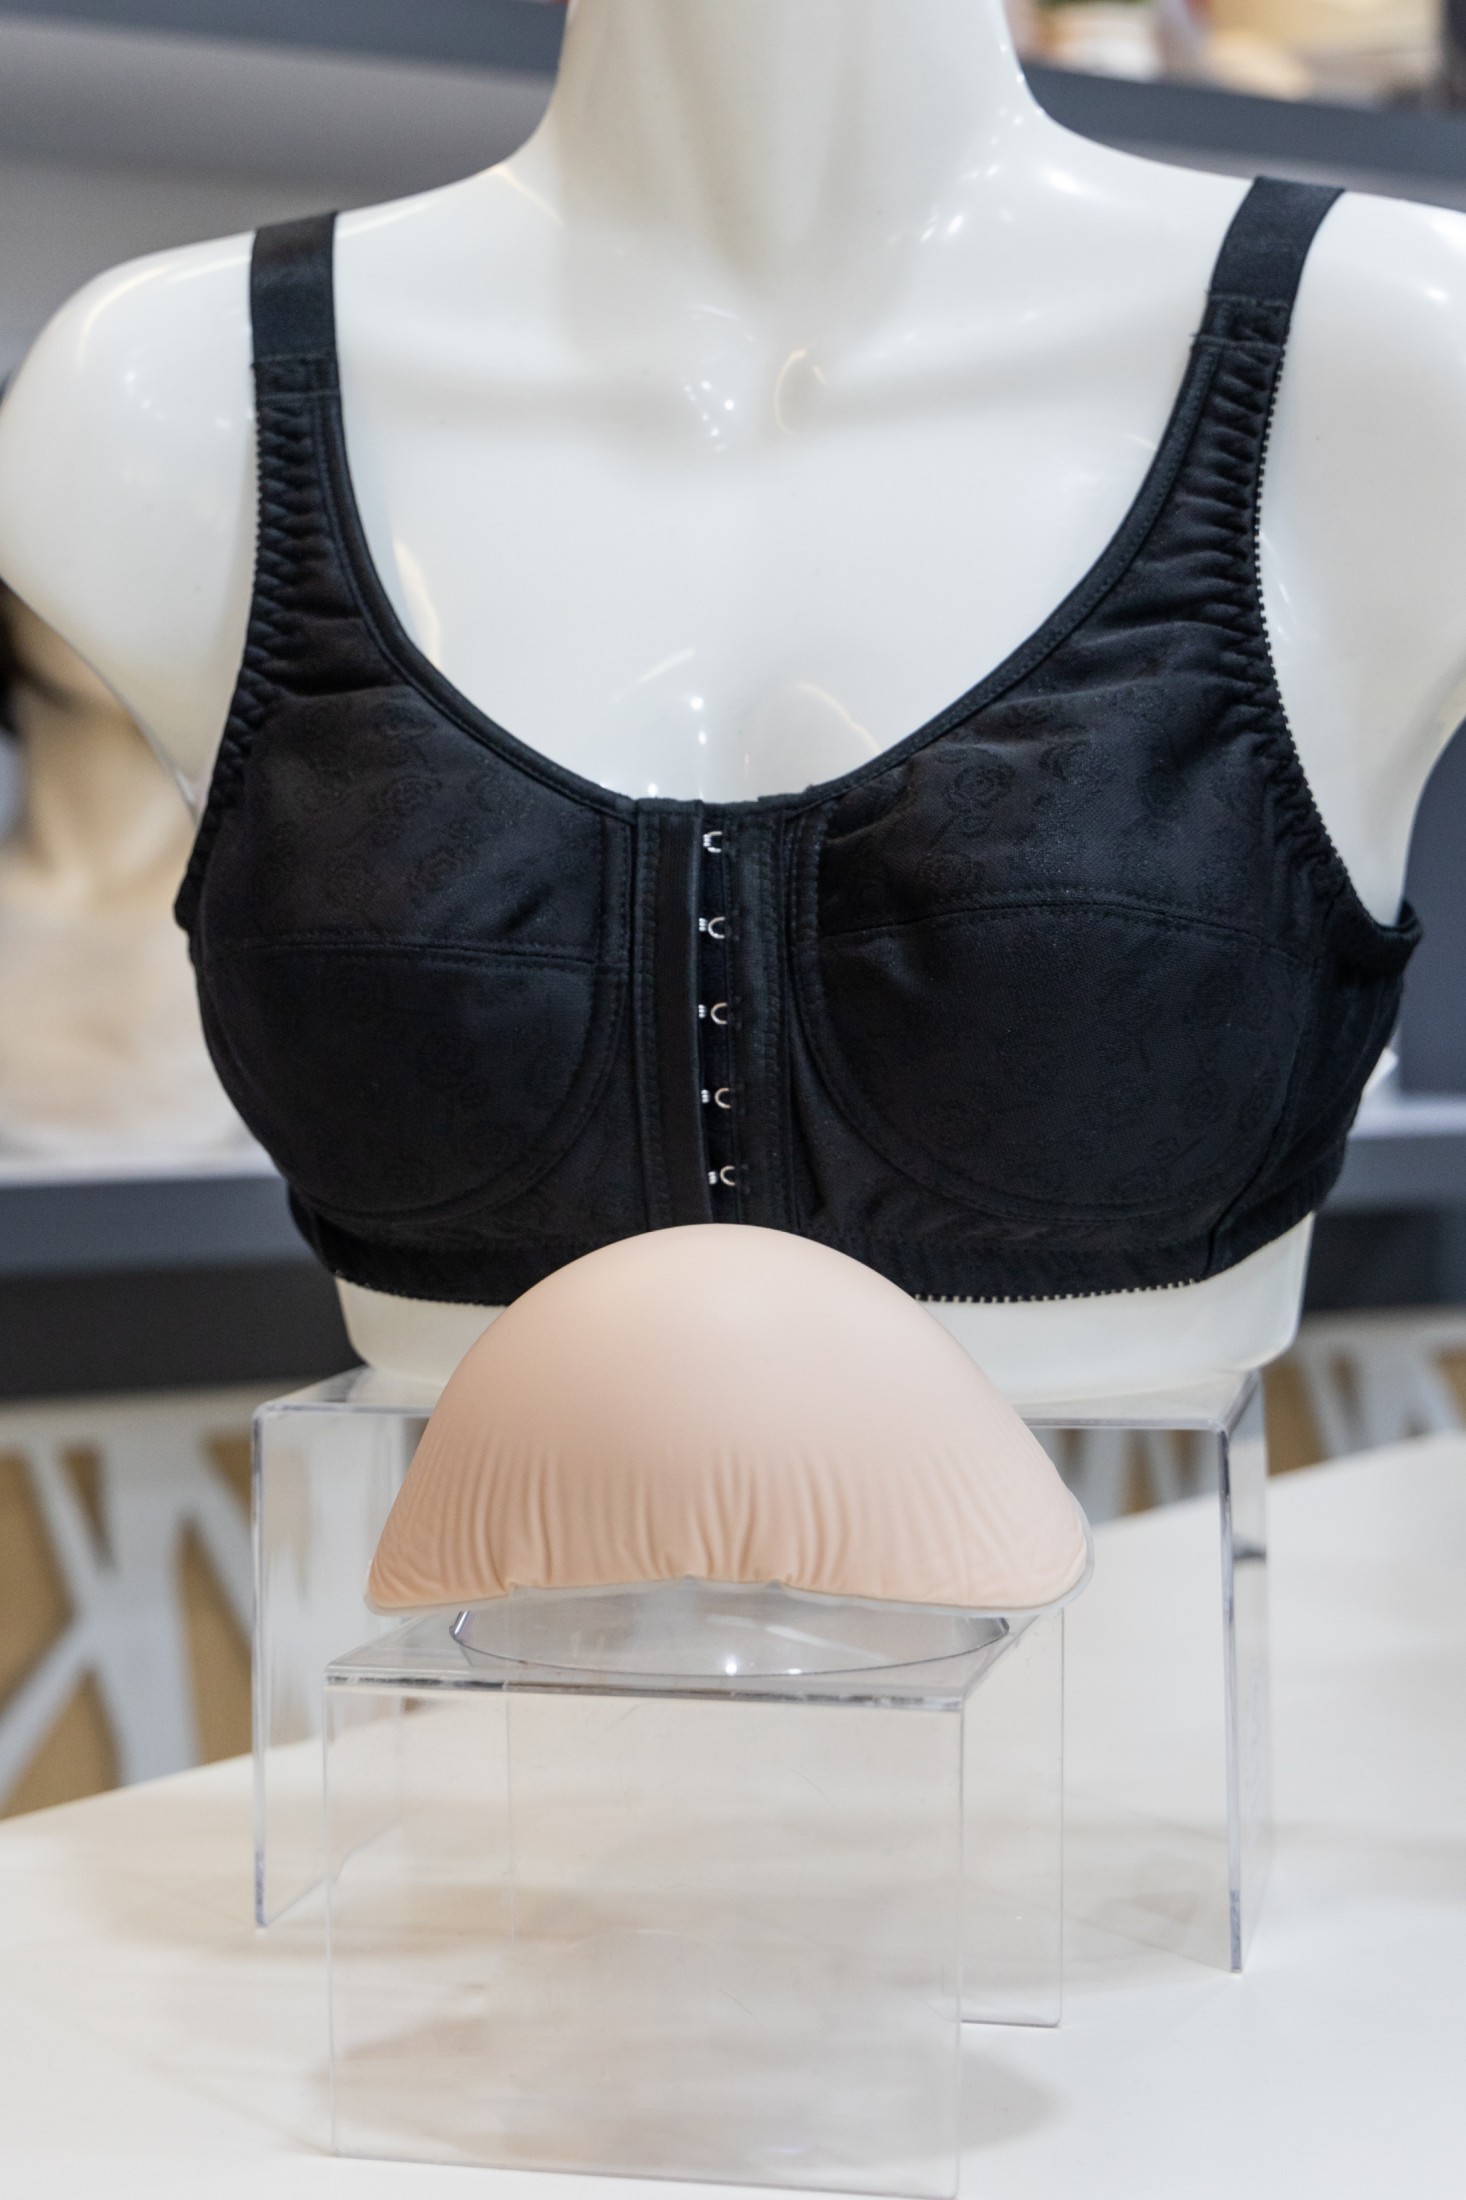 How to Choose Breast Forms for Cancer Patients - Mastectomy Shop